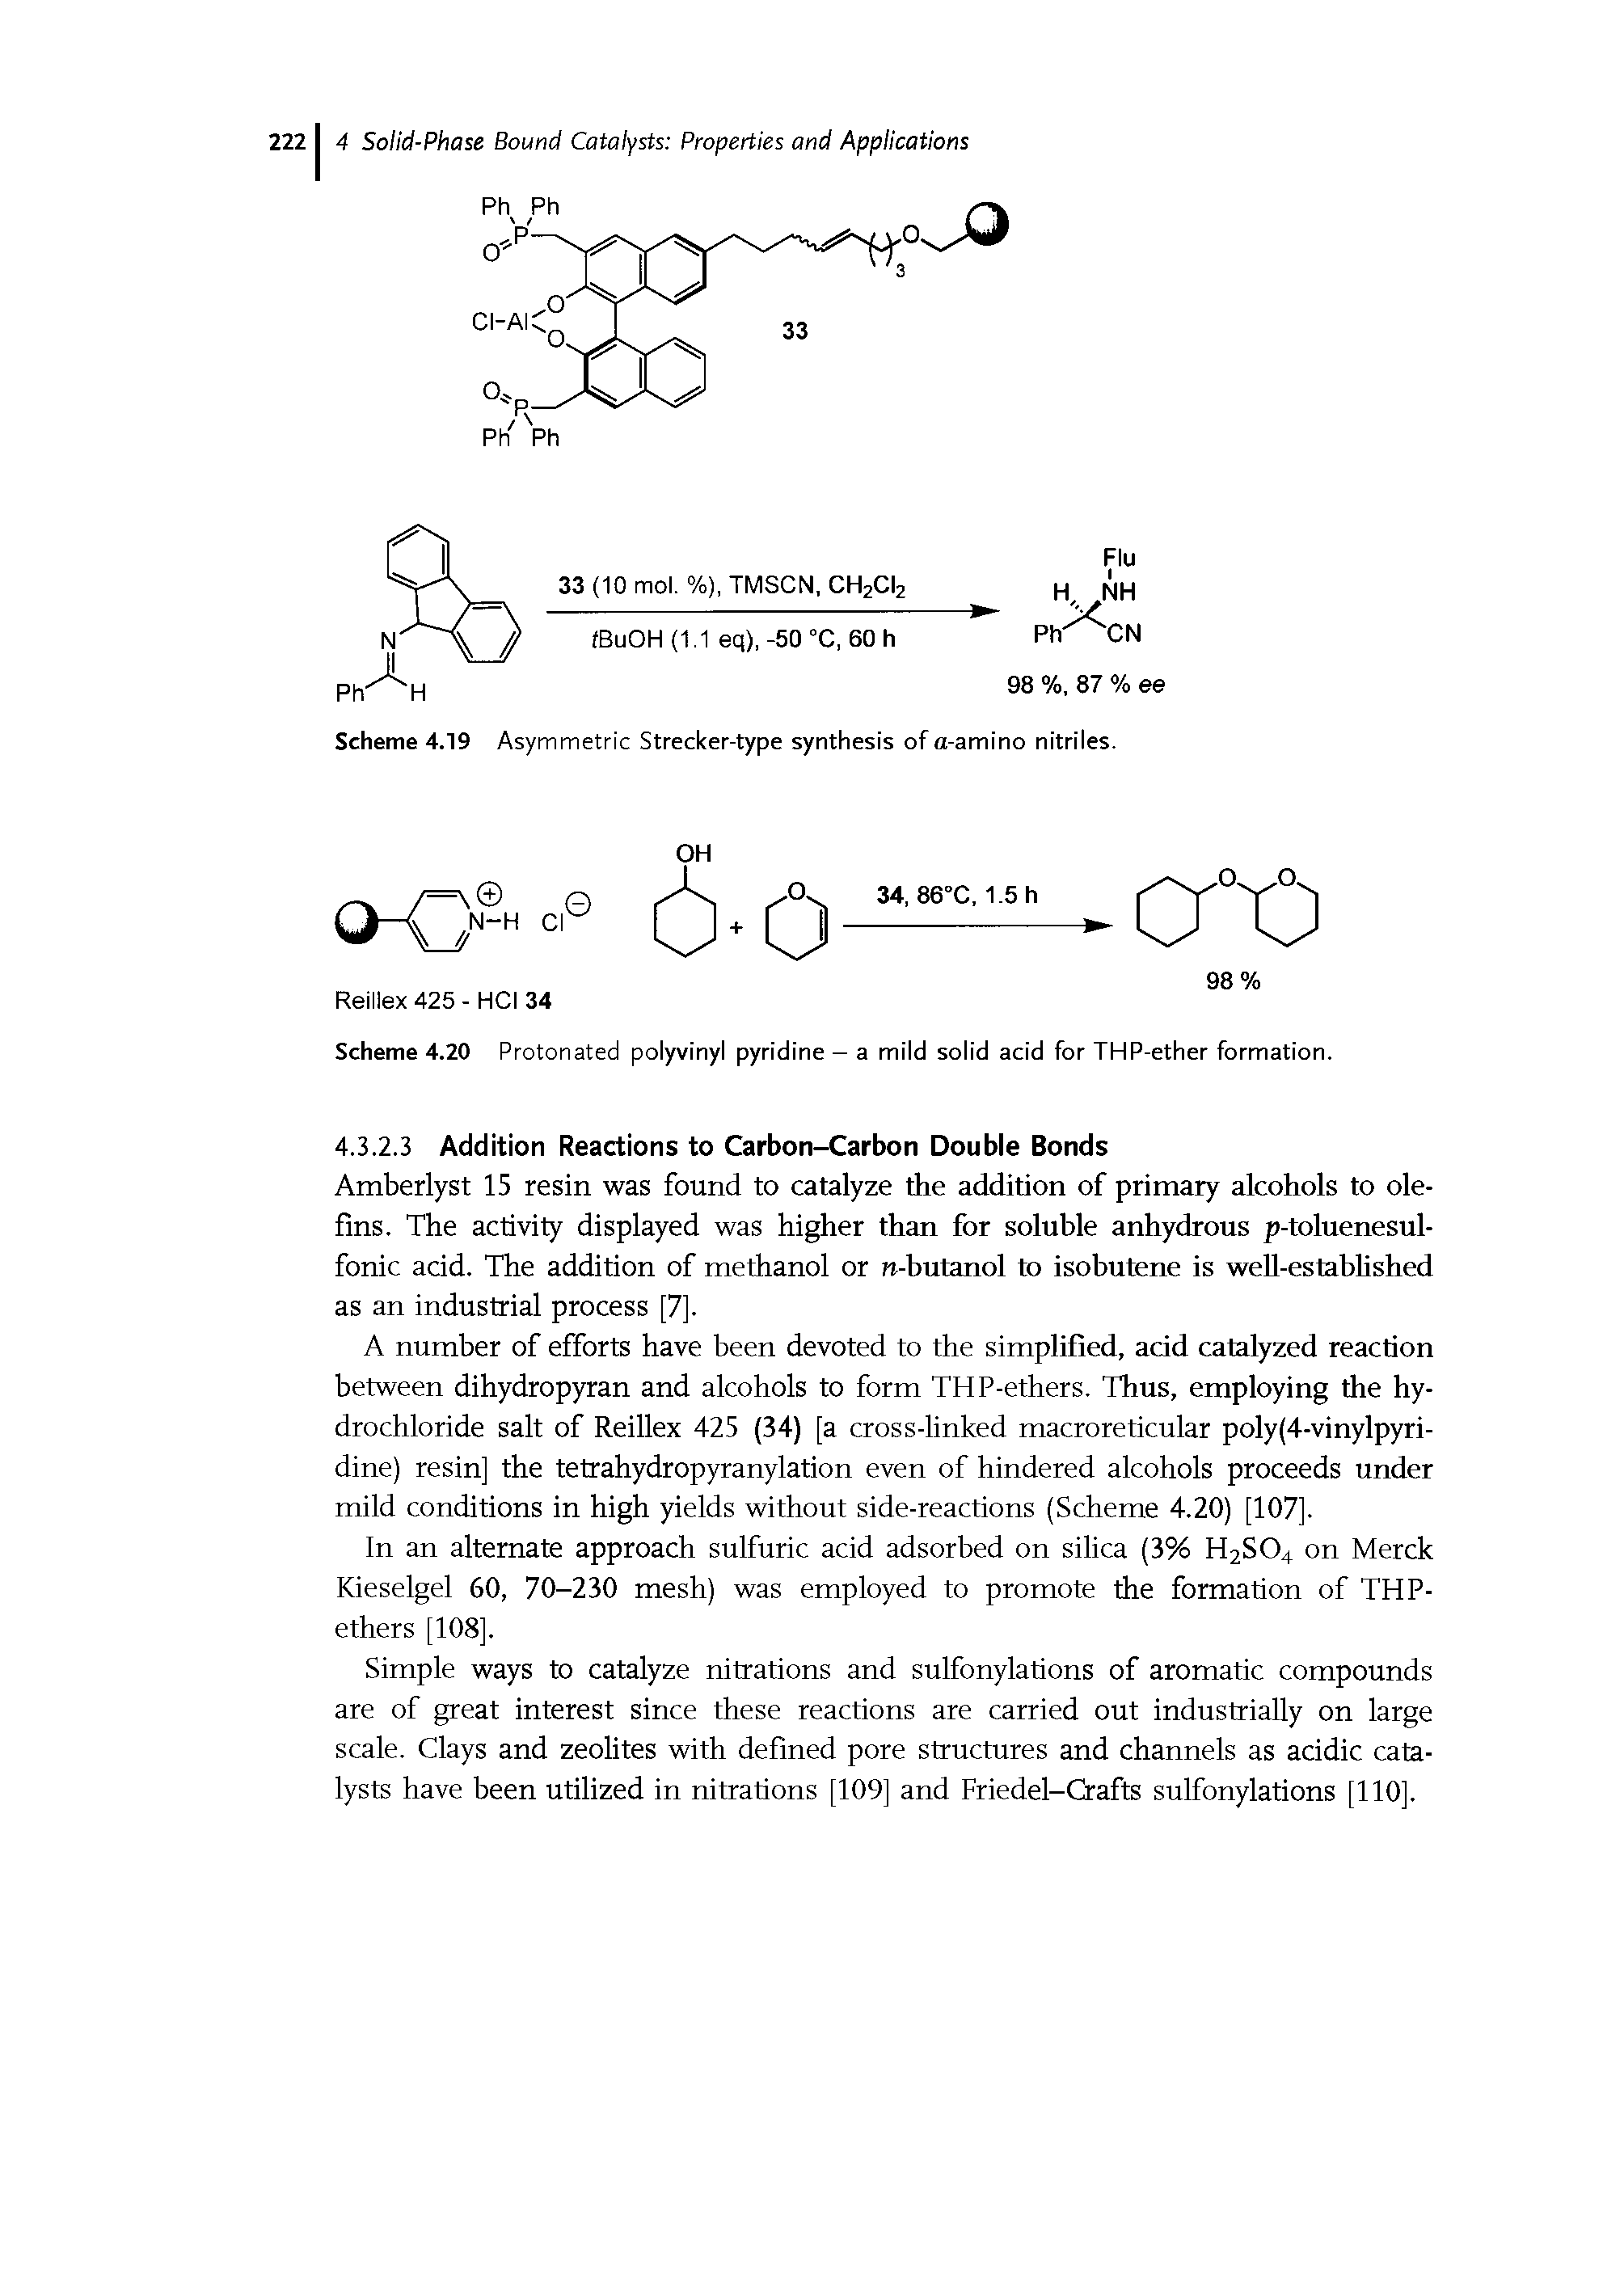 Scheme 4.20 Protonated polyvinyl pyridine — a mild solid acid for THP-ether formation.